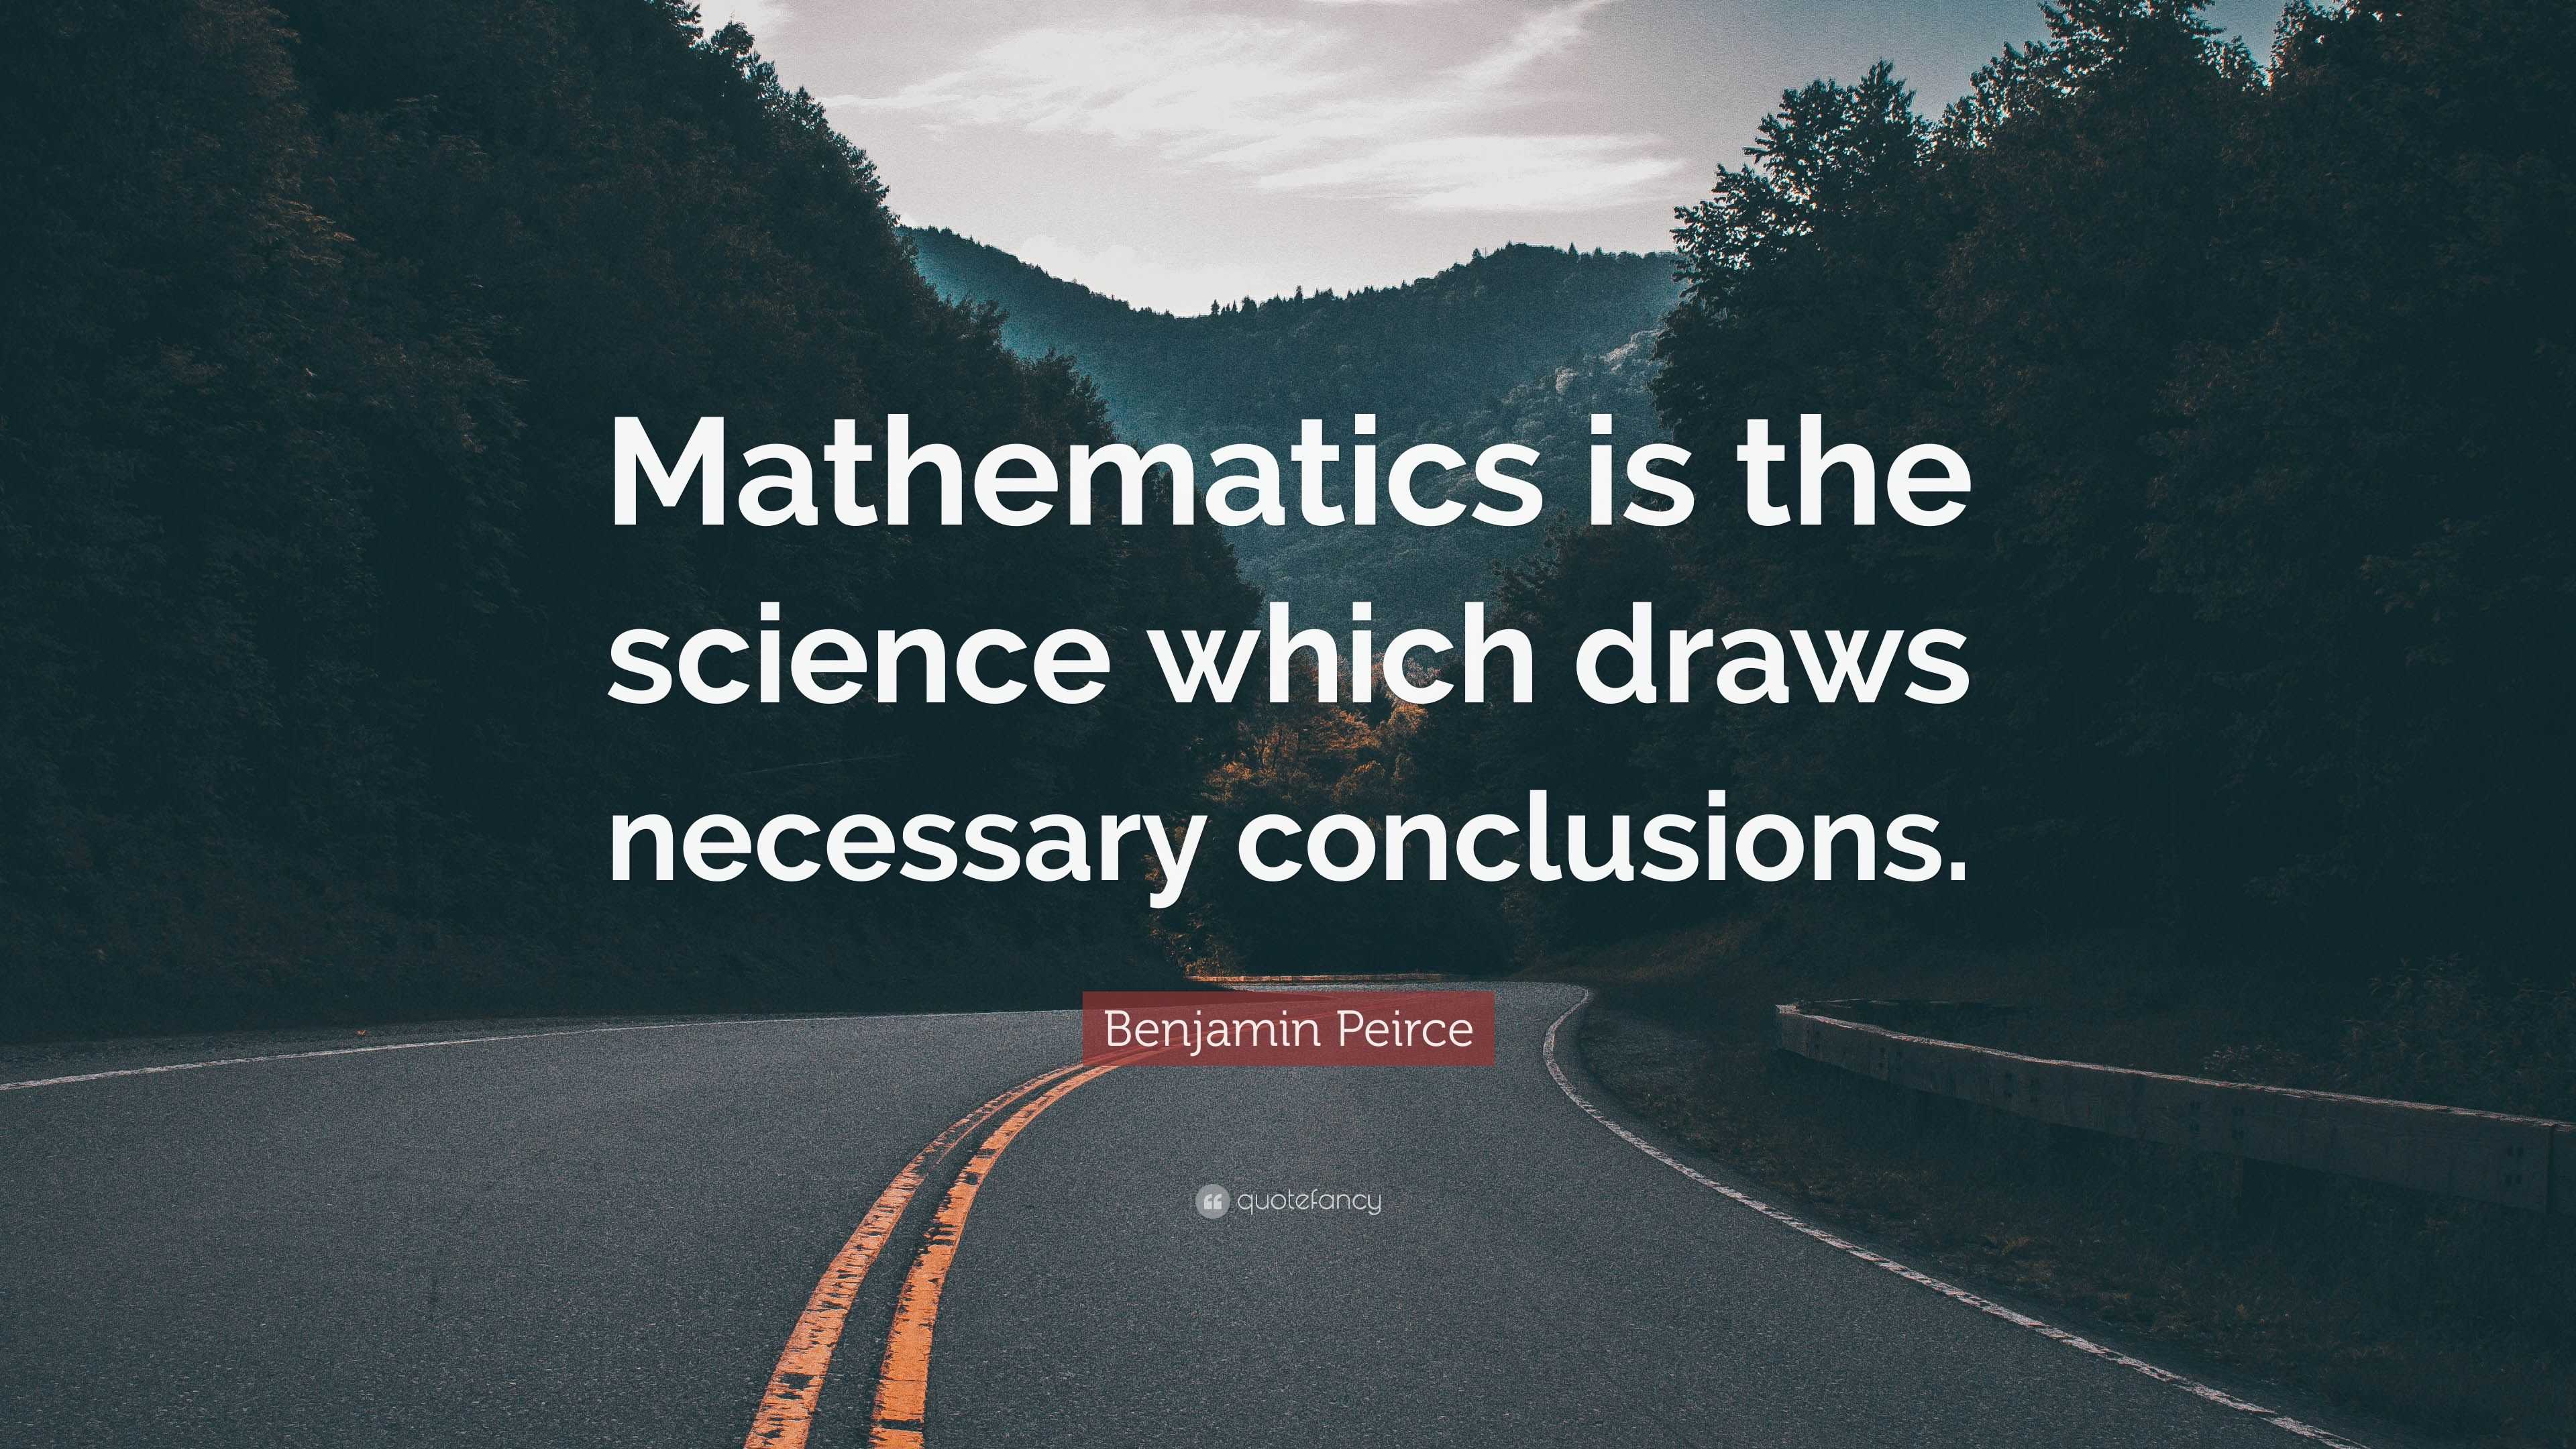 Benjamin Peirce Quote “Mathematics is the science which draws